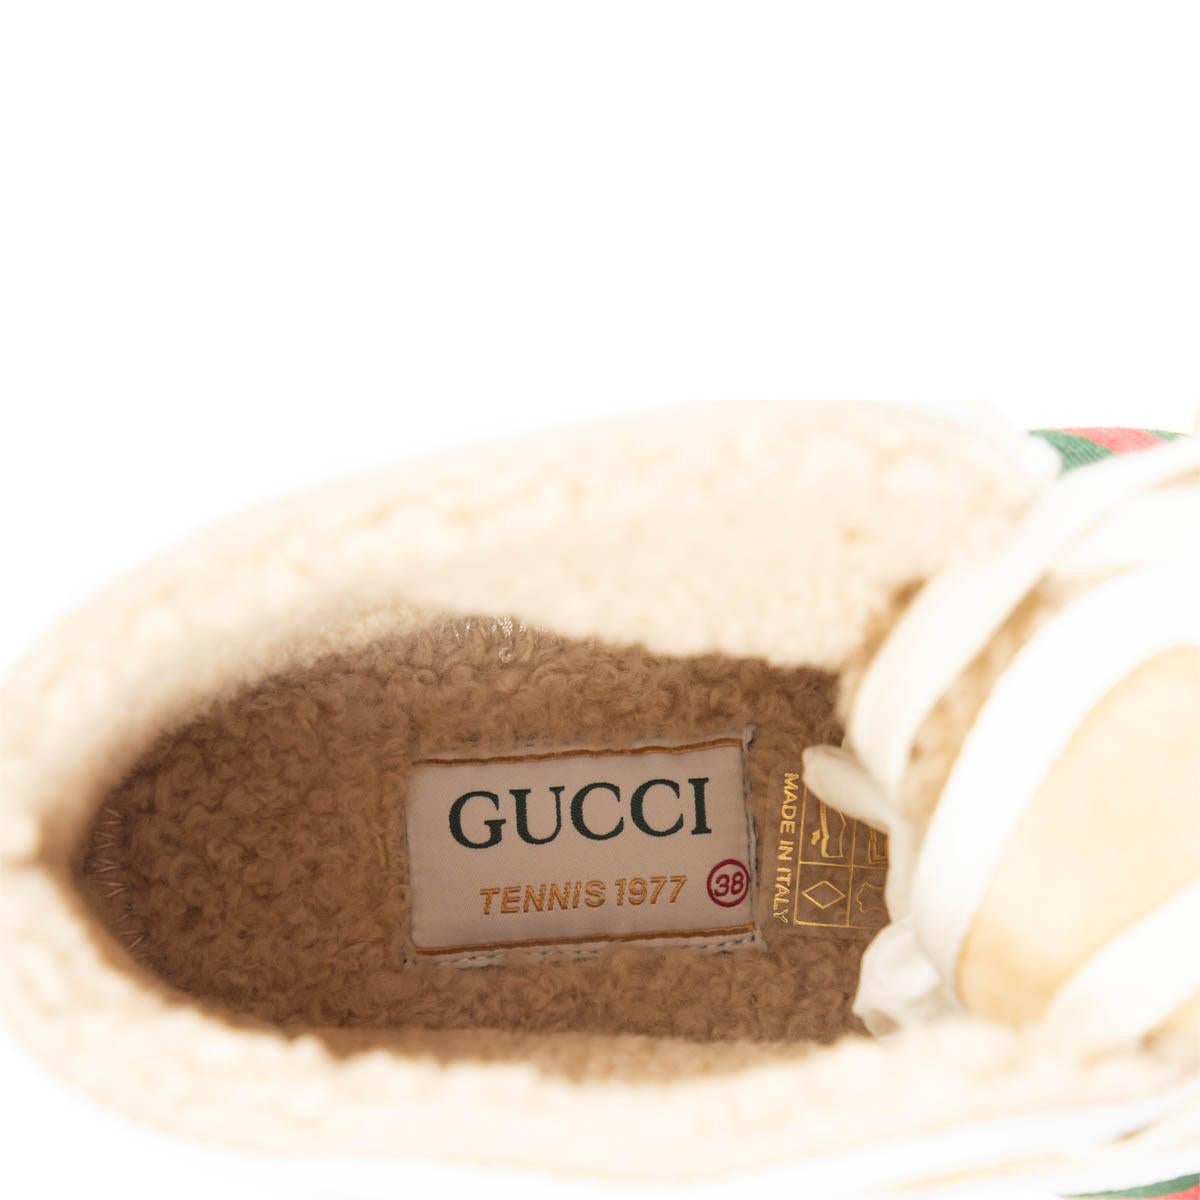 Beige GUCCI beige suede TENNIS 1977 SHEARLING LINED High Top Sneakers Shoes 38 For Sale